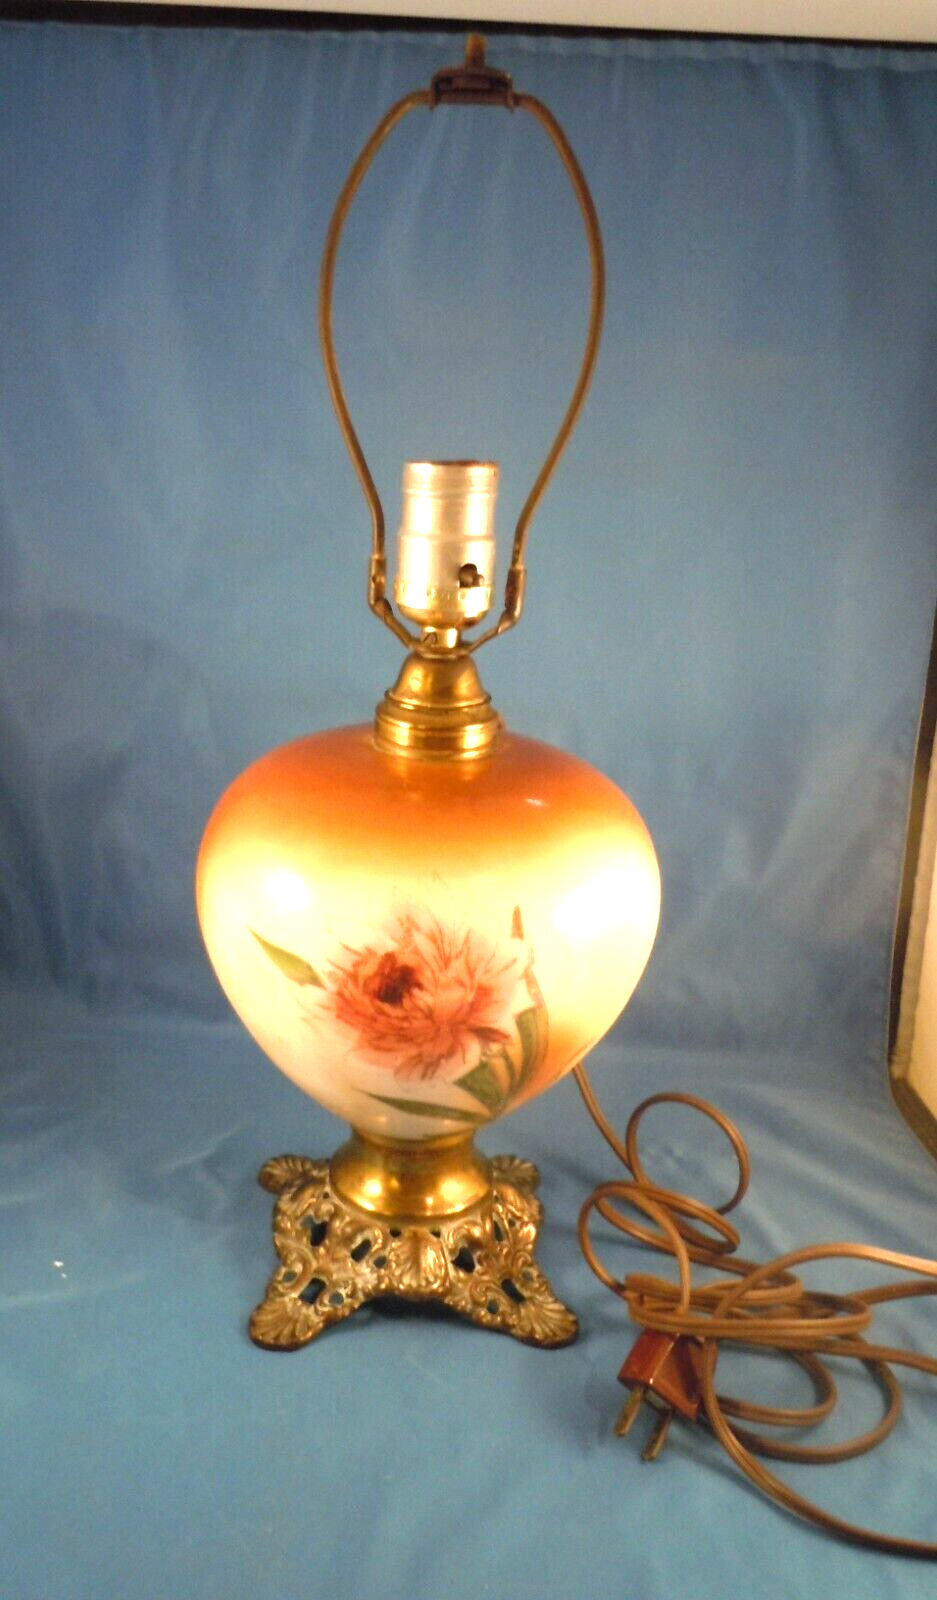 LAMP - Antique Hand-Painted Porcelain Rose-Pattern Lamp - Tested & Working